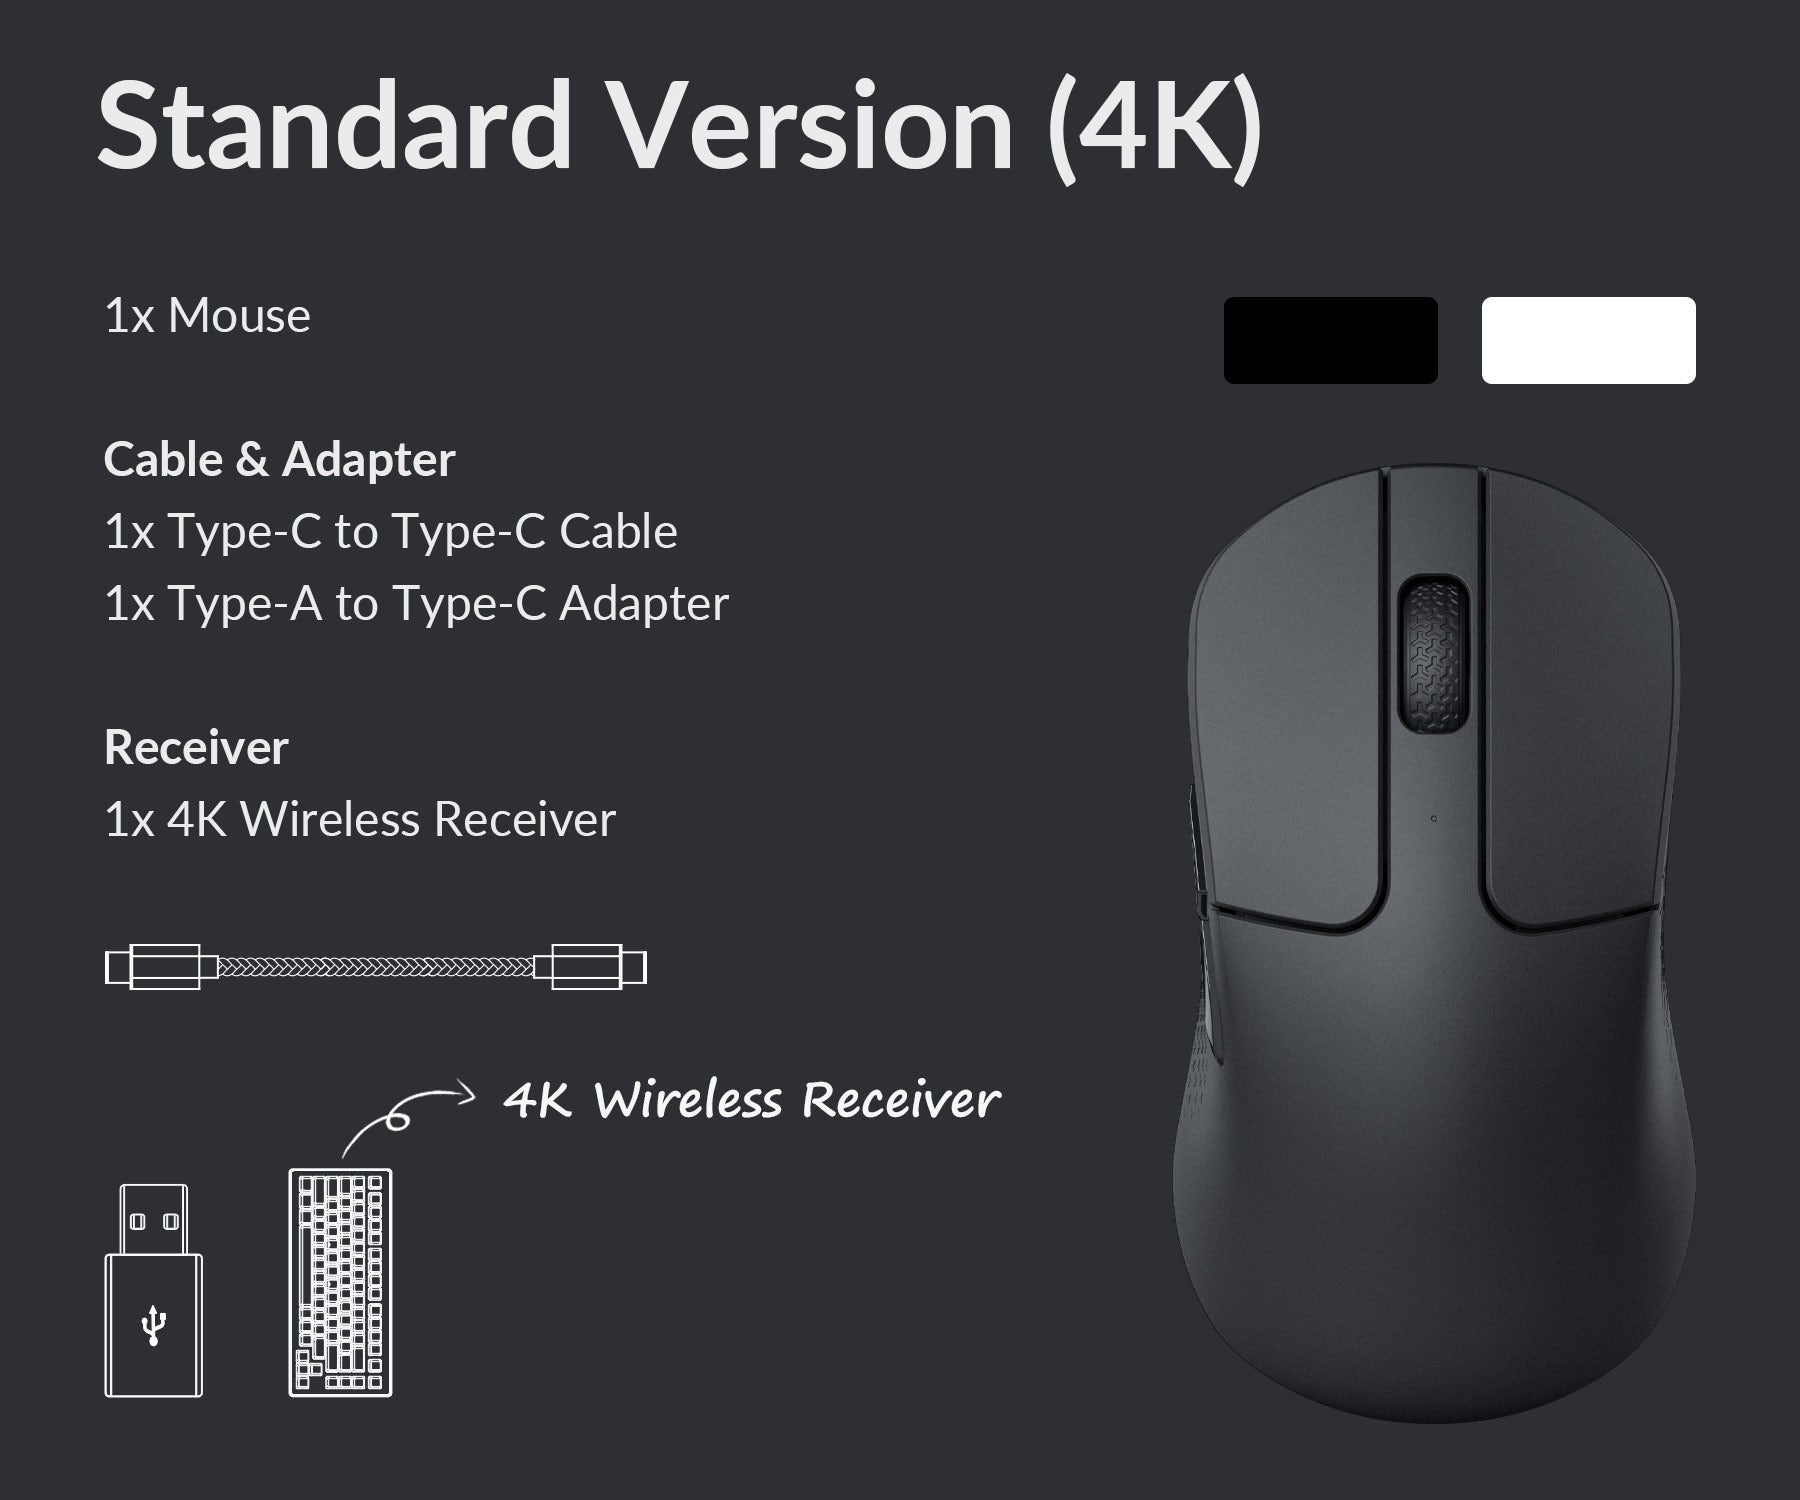 Package List of the Keychron M3 mini 4K Wireless Optical Mouse